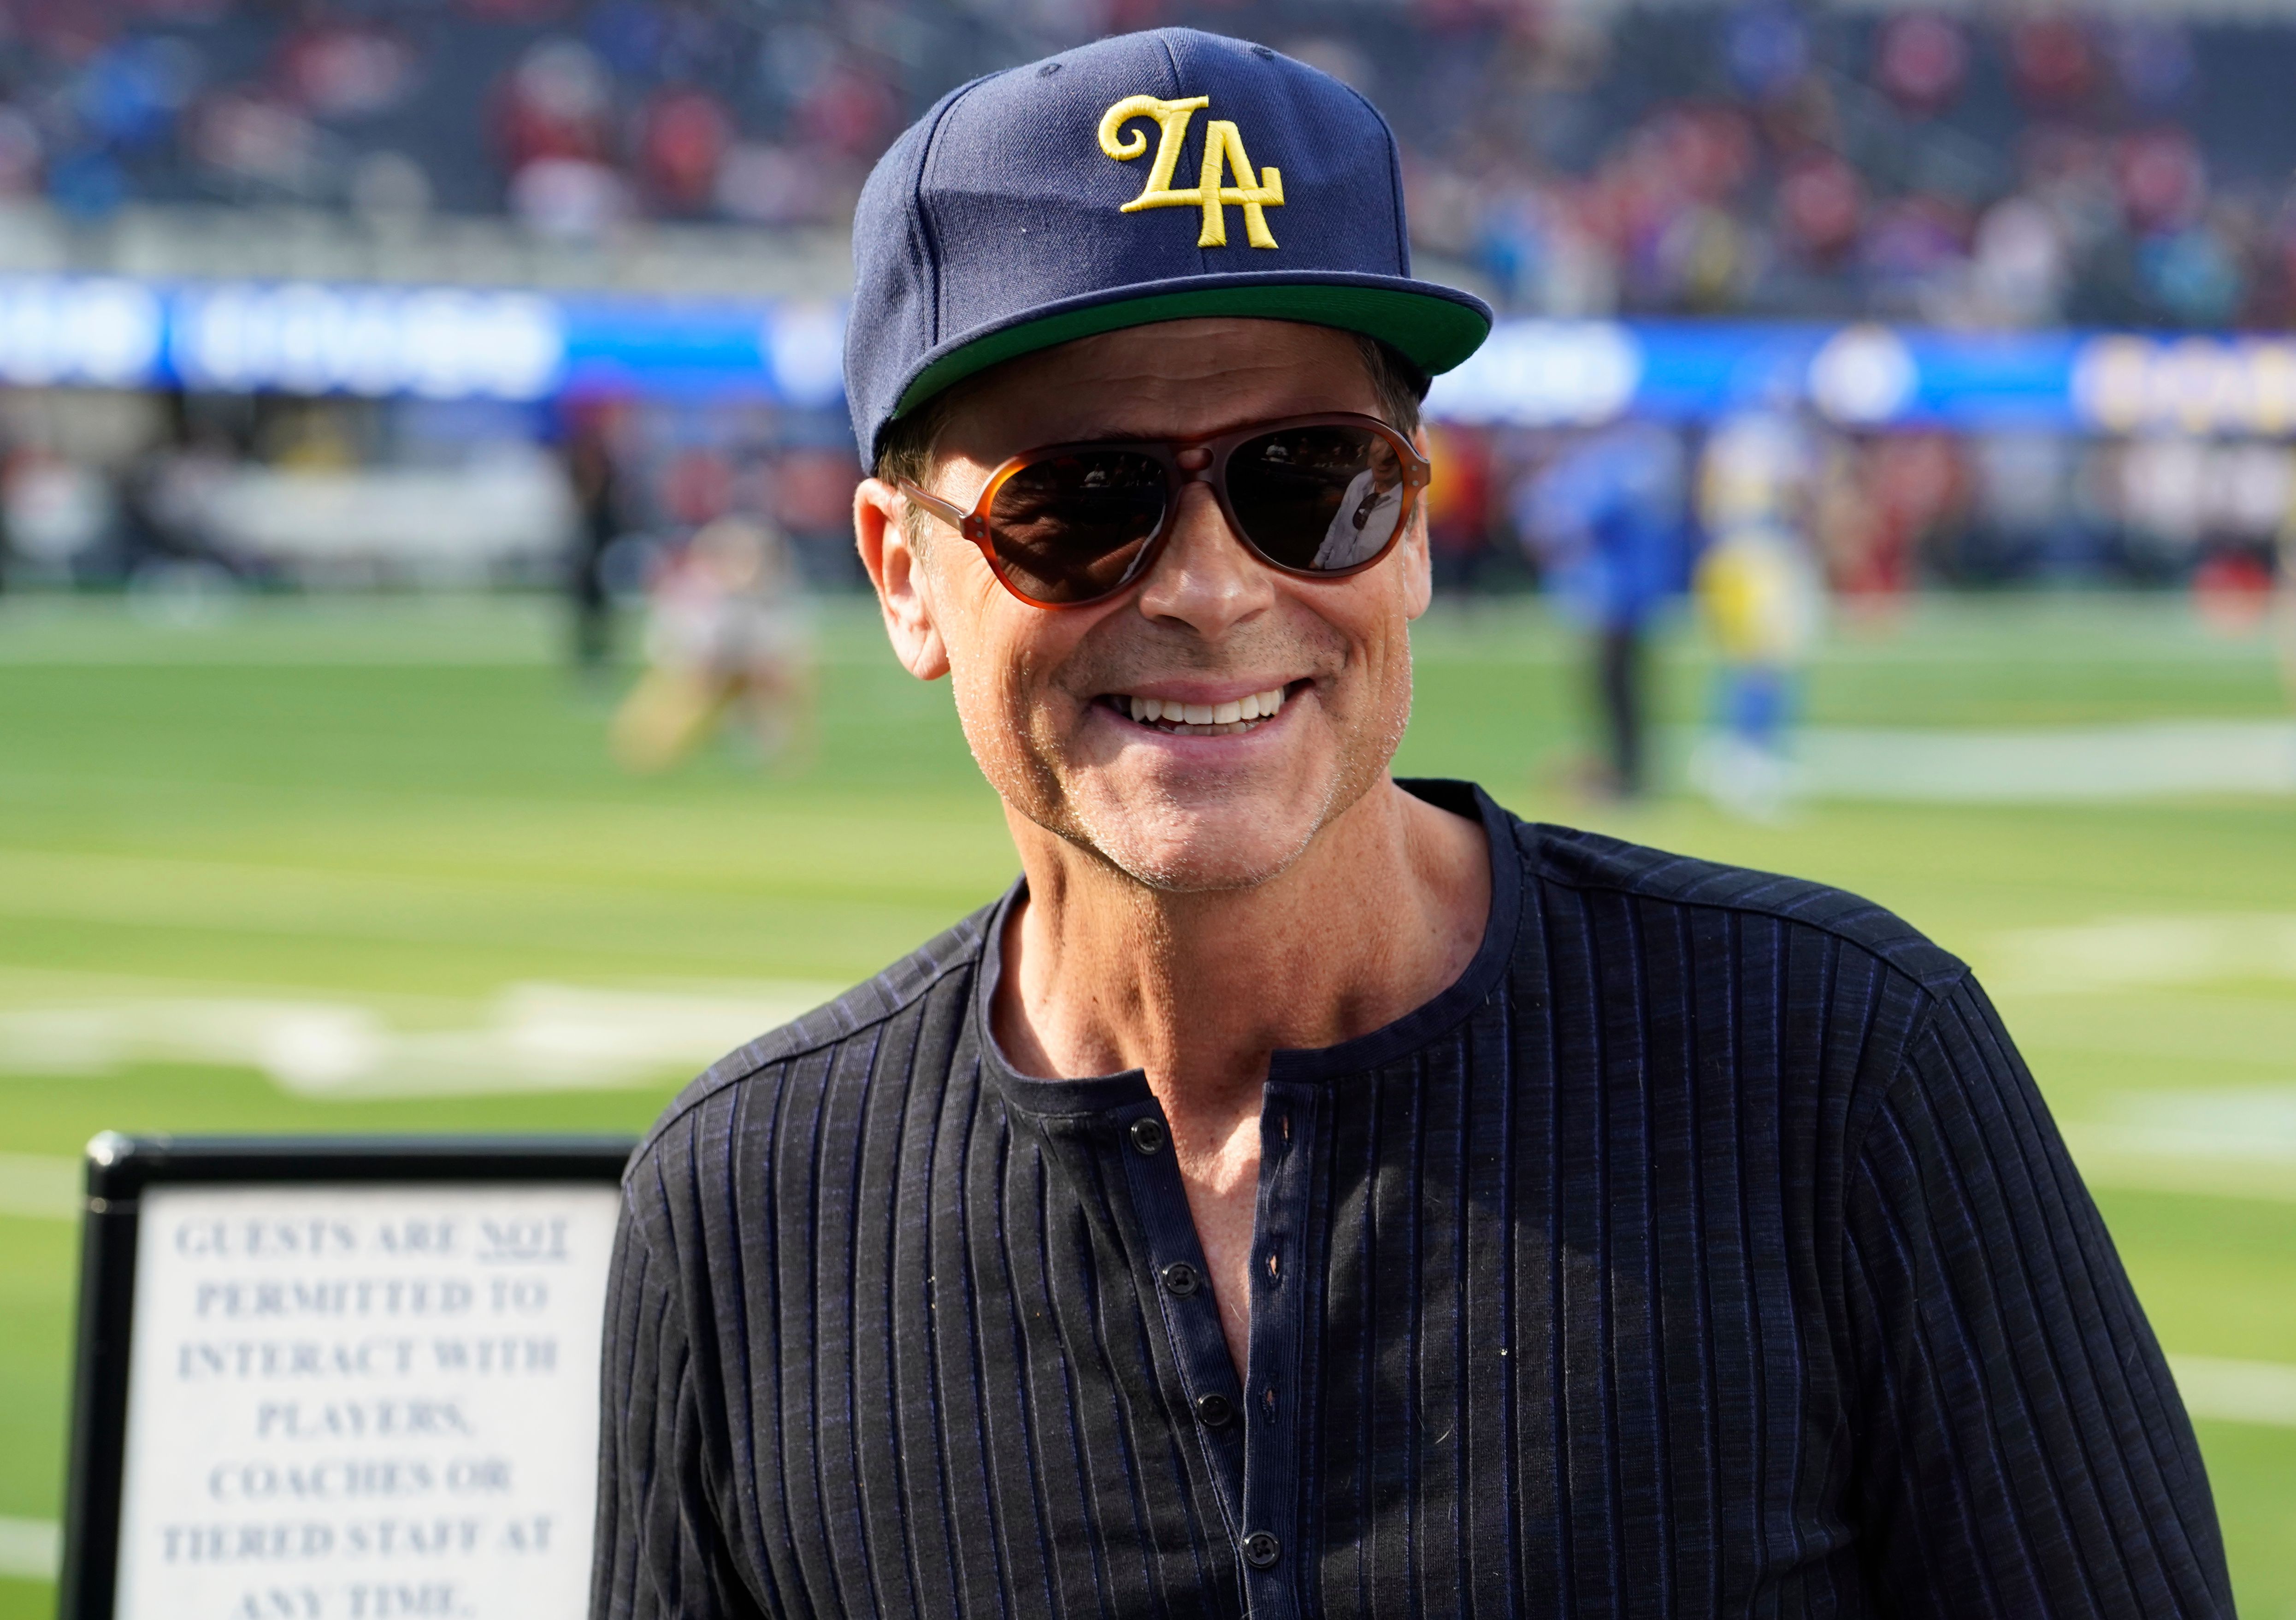 See celebrity fans of the Rams vs. celebrity fans of the Bengals